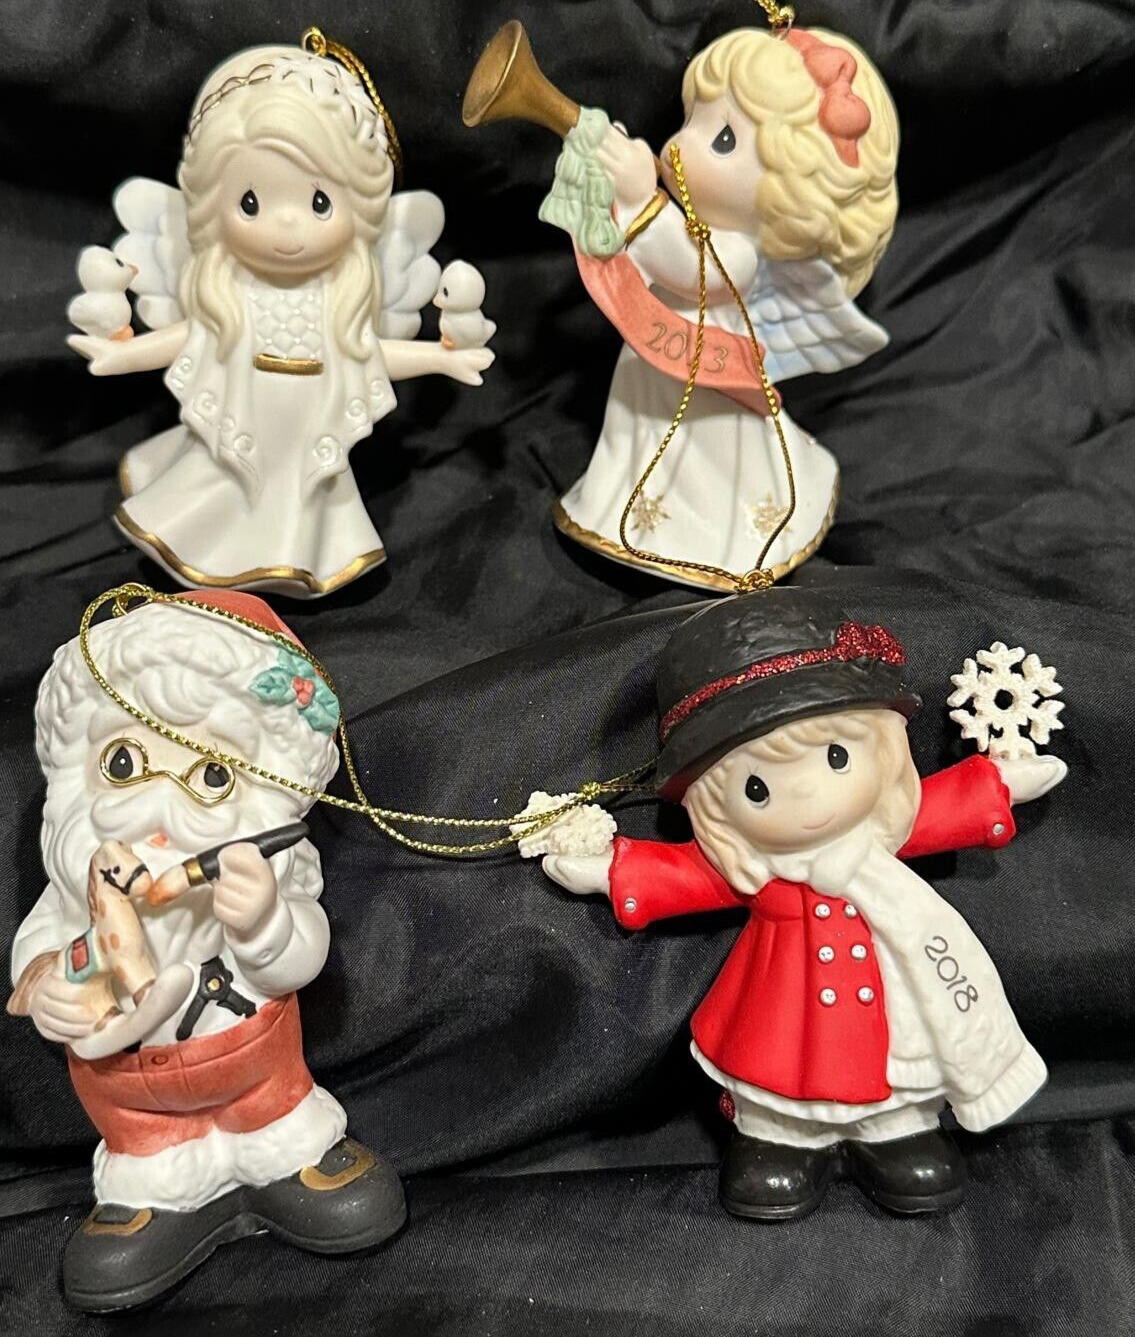 4 cute precious moments ornaments in his perfect peace and love